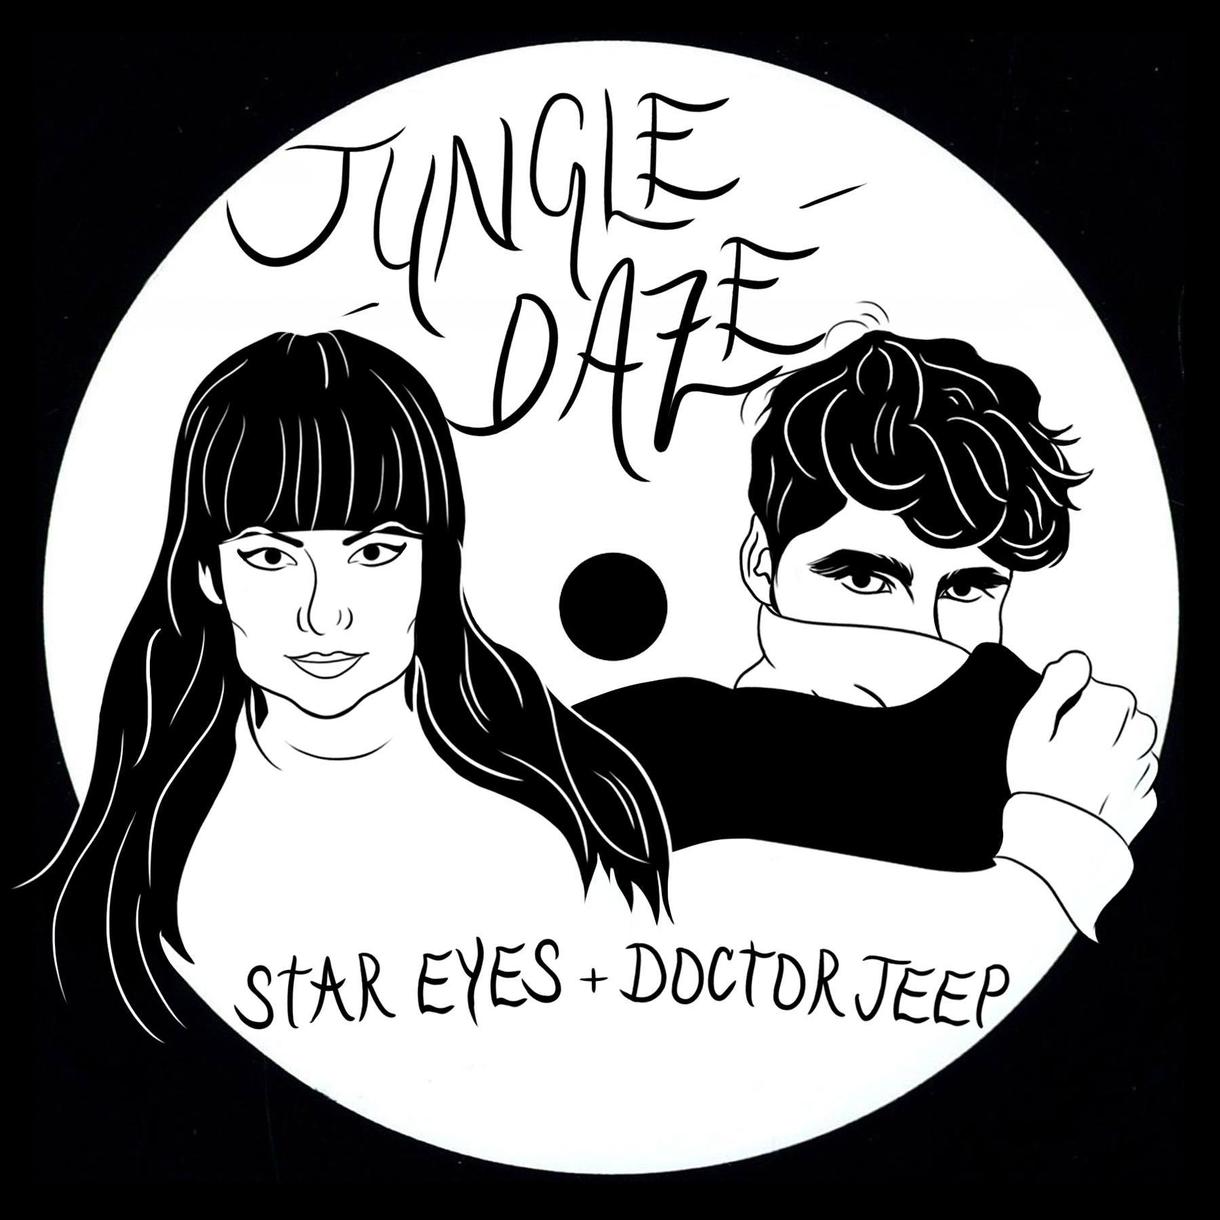 star-eyes-doctor-jeep-jungle-mix-body-image-1463593107